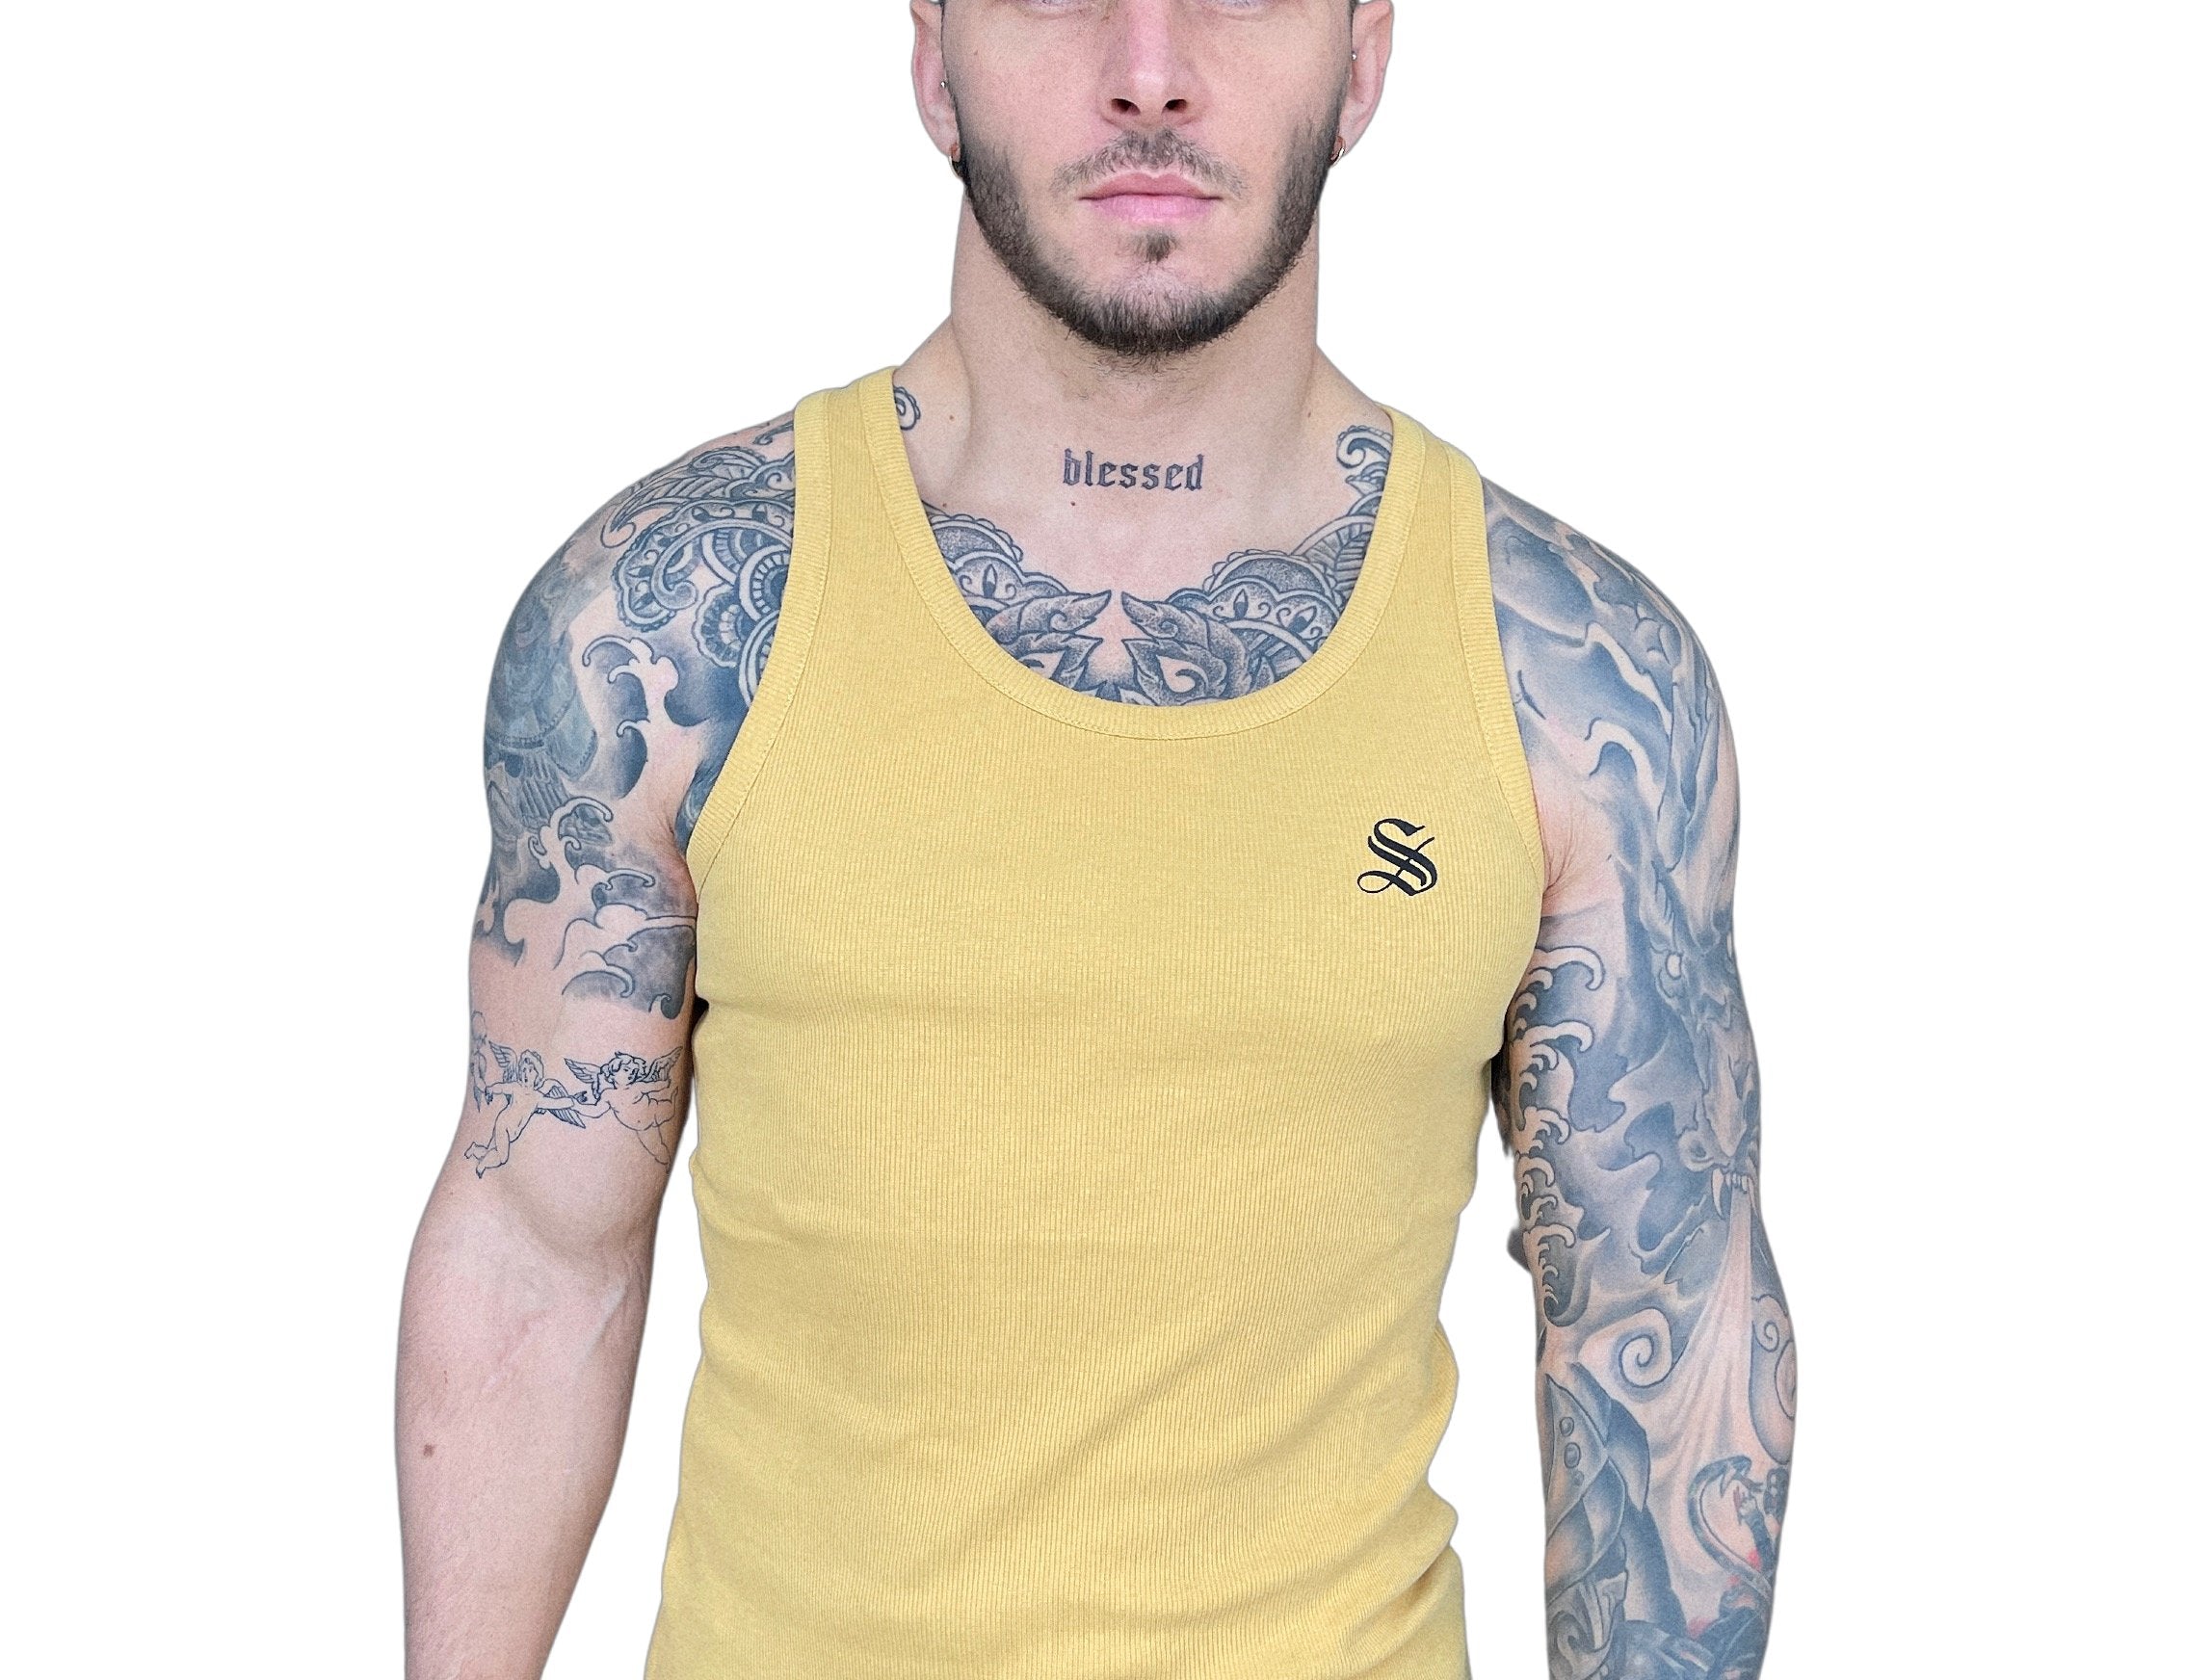 Godon - Gold Tank Top for Men - Sarman Fashion - Wholesale Clothing Fashion Brand for Men from Canada